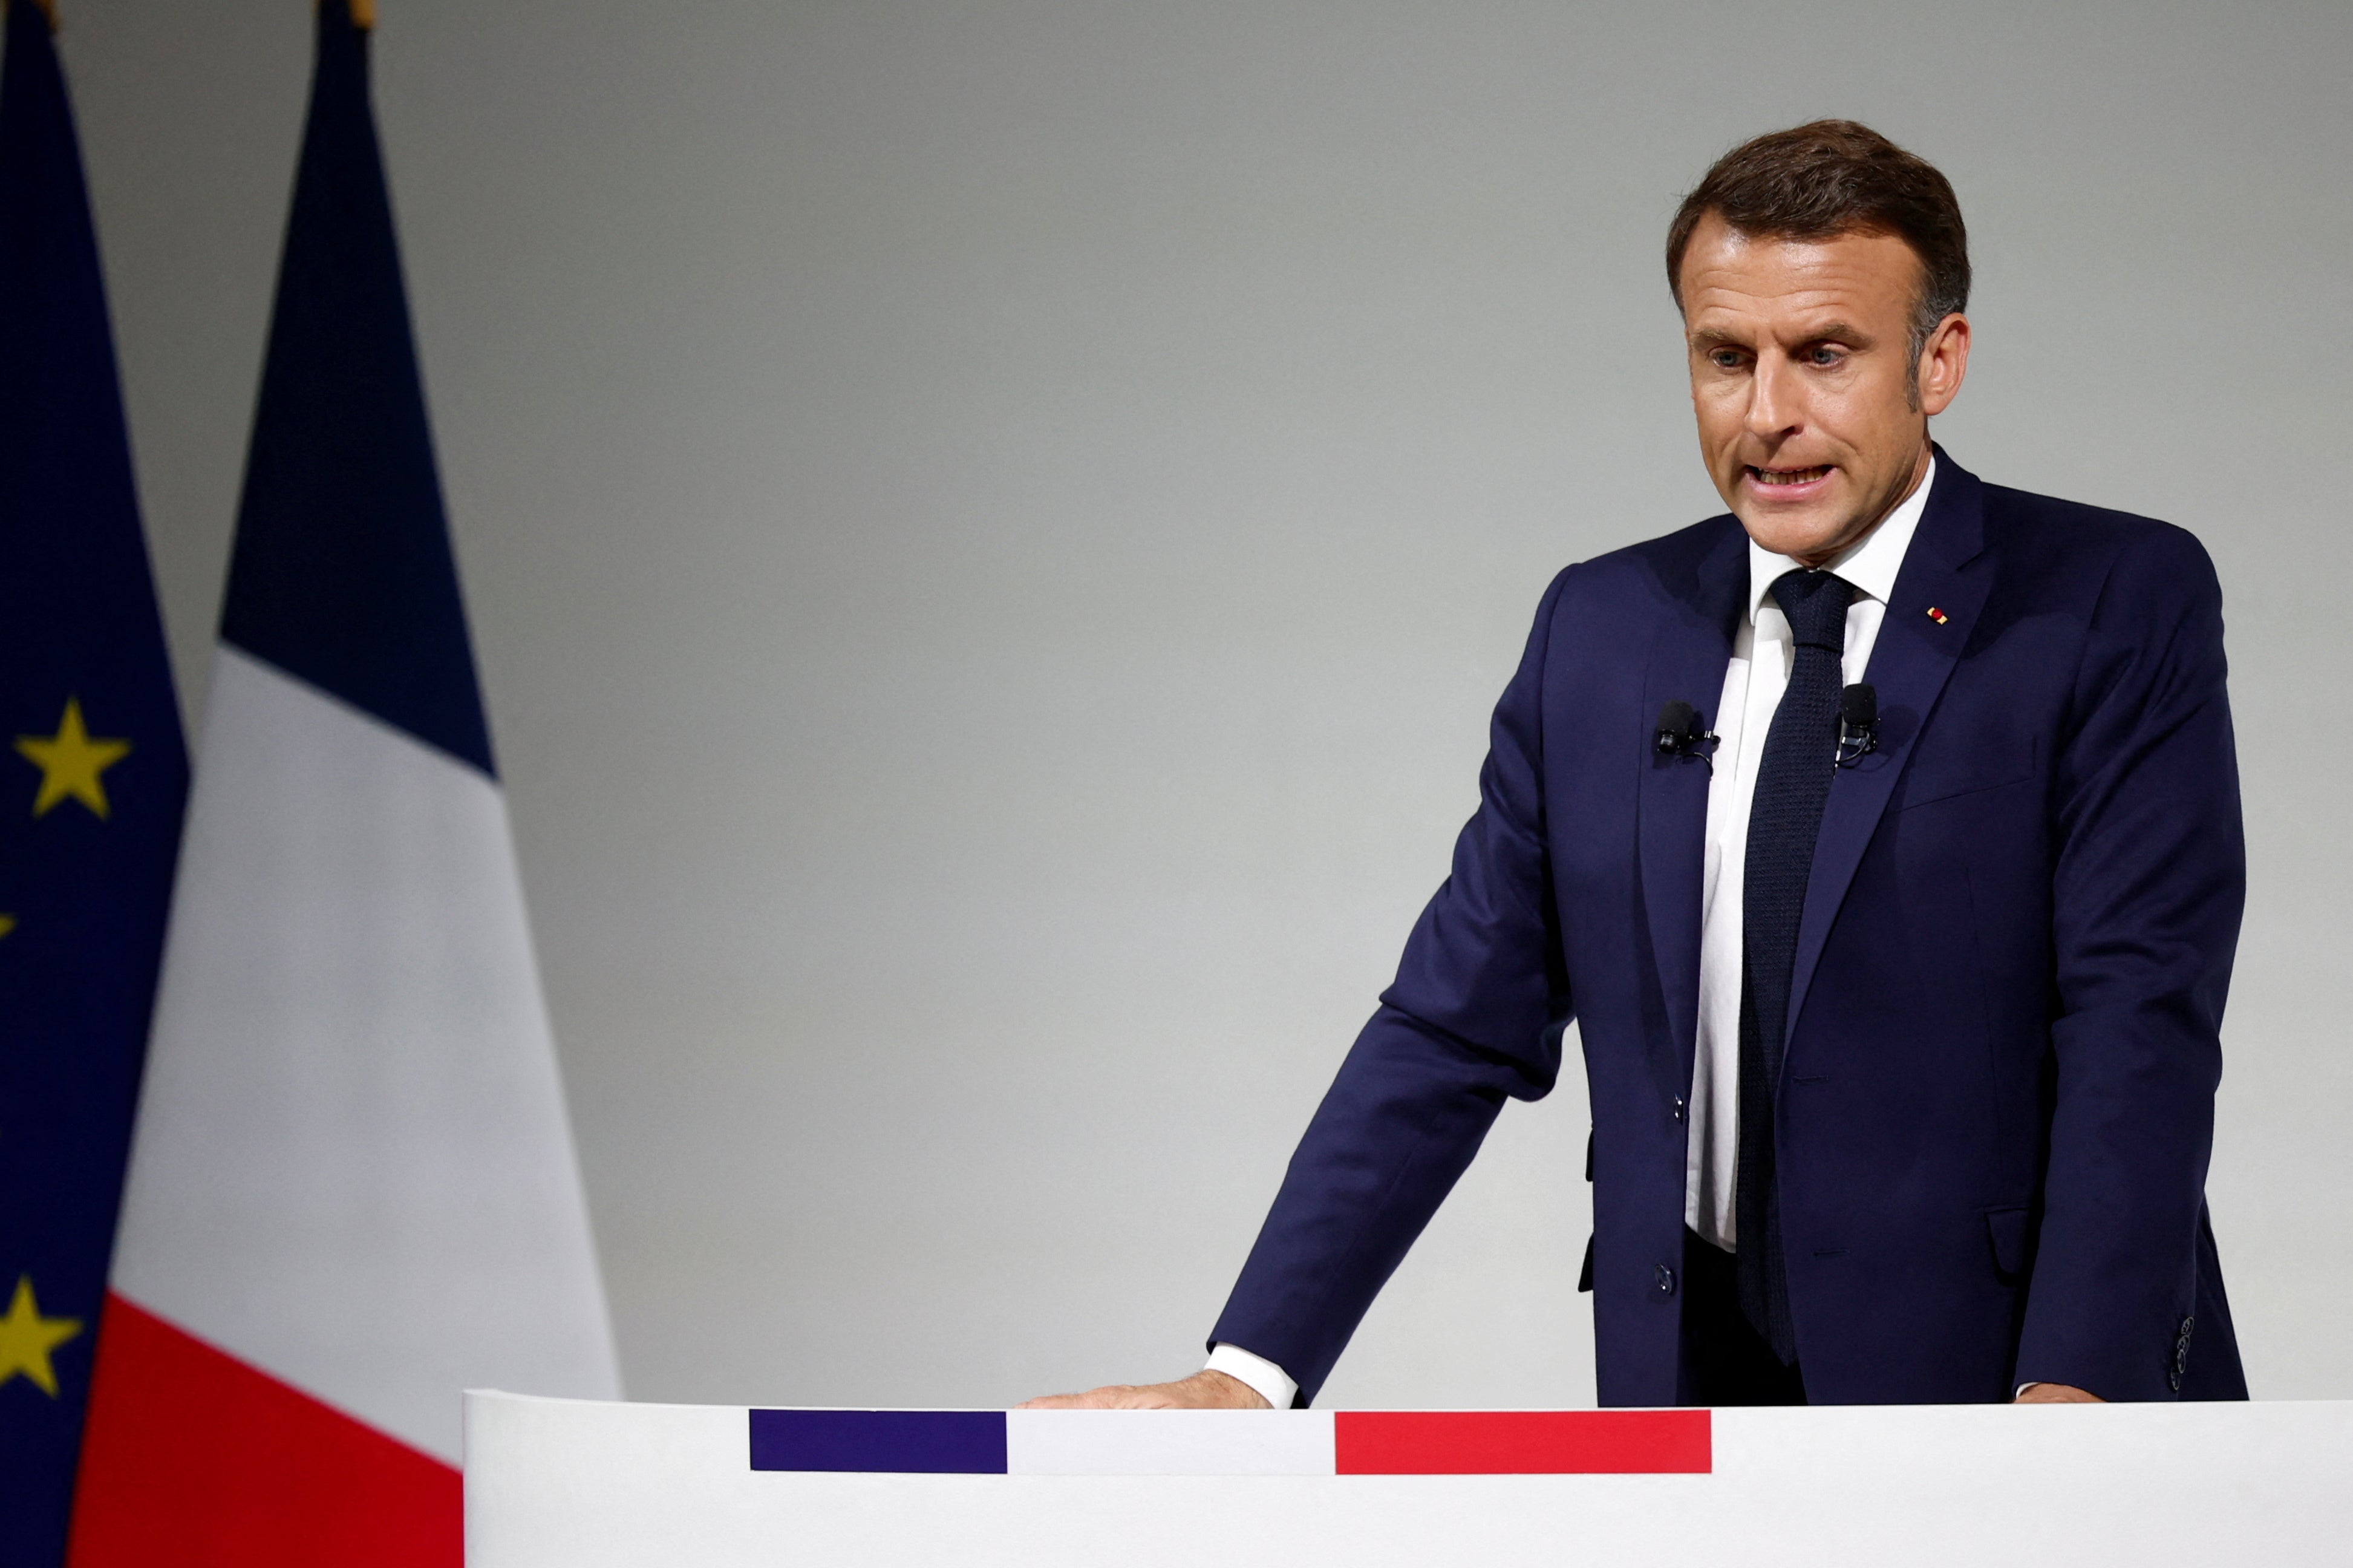 Emmanuel Macron’s election gamble does not appear to have paid off, with Rassemblement National on course to become the largest party in the National Assembly